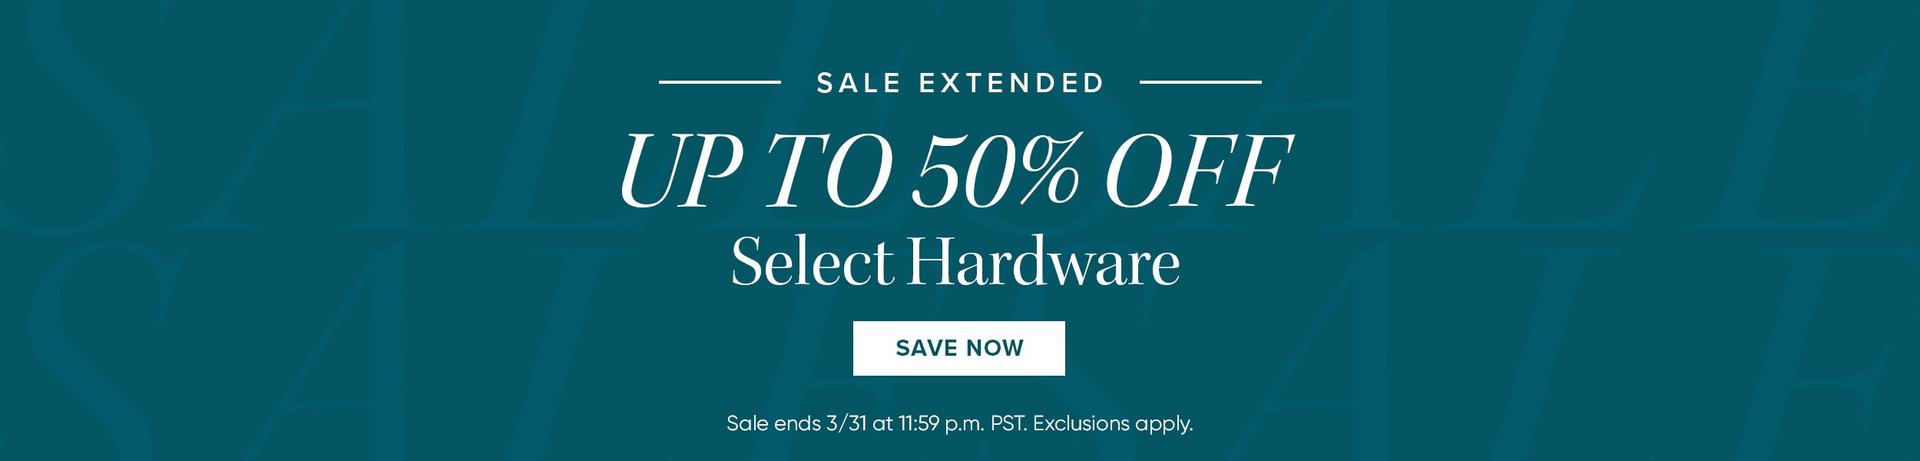 Sale Extended - Up to 50% Off Select Hardware, Save Now